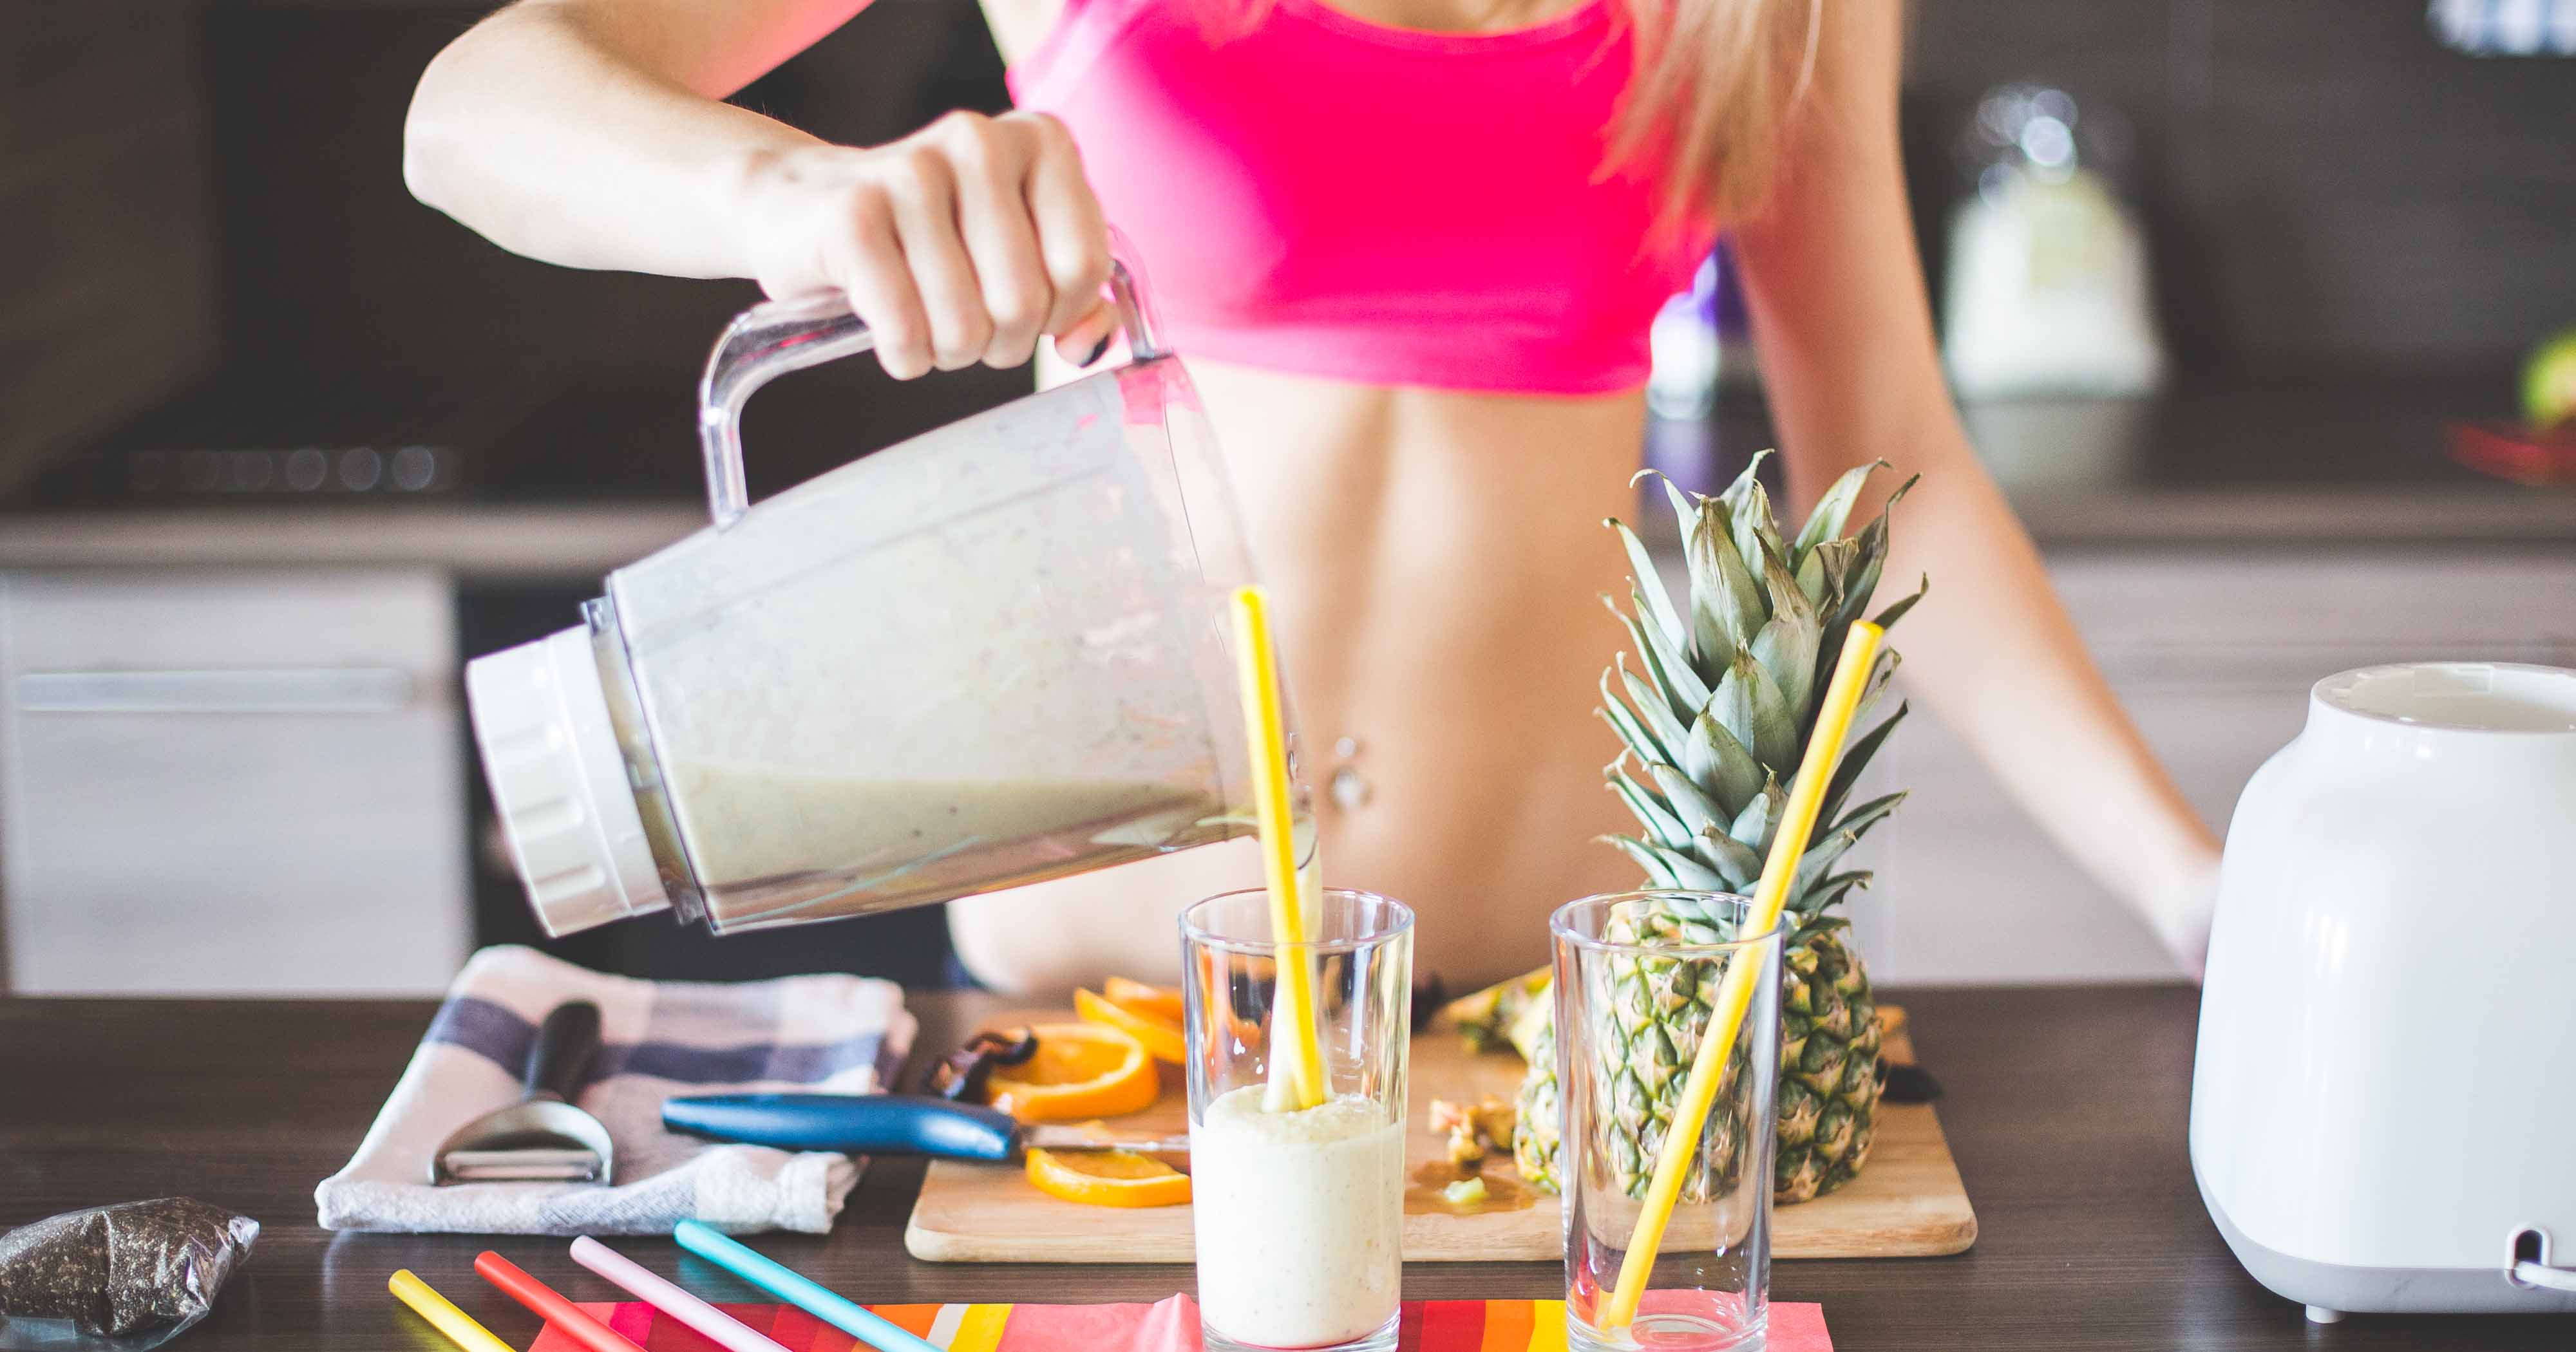 Woman pouring protein shake into glass on counter.